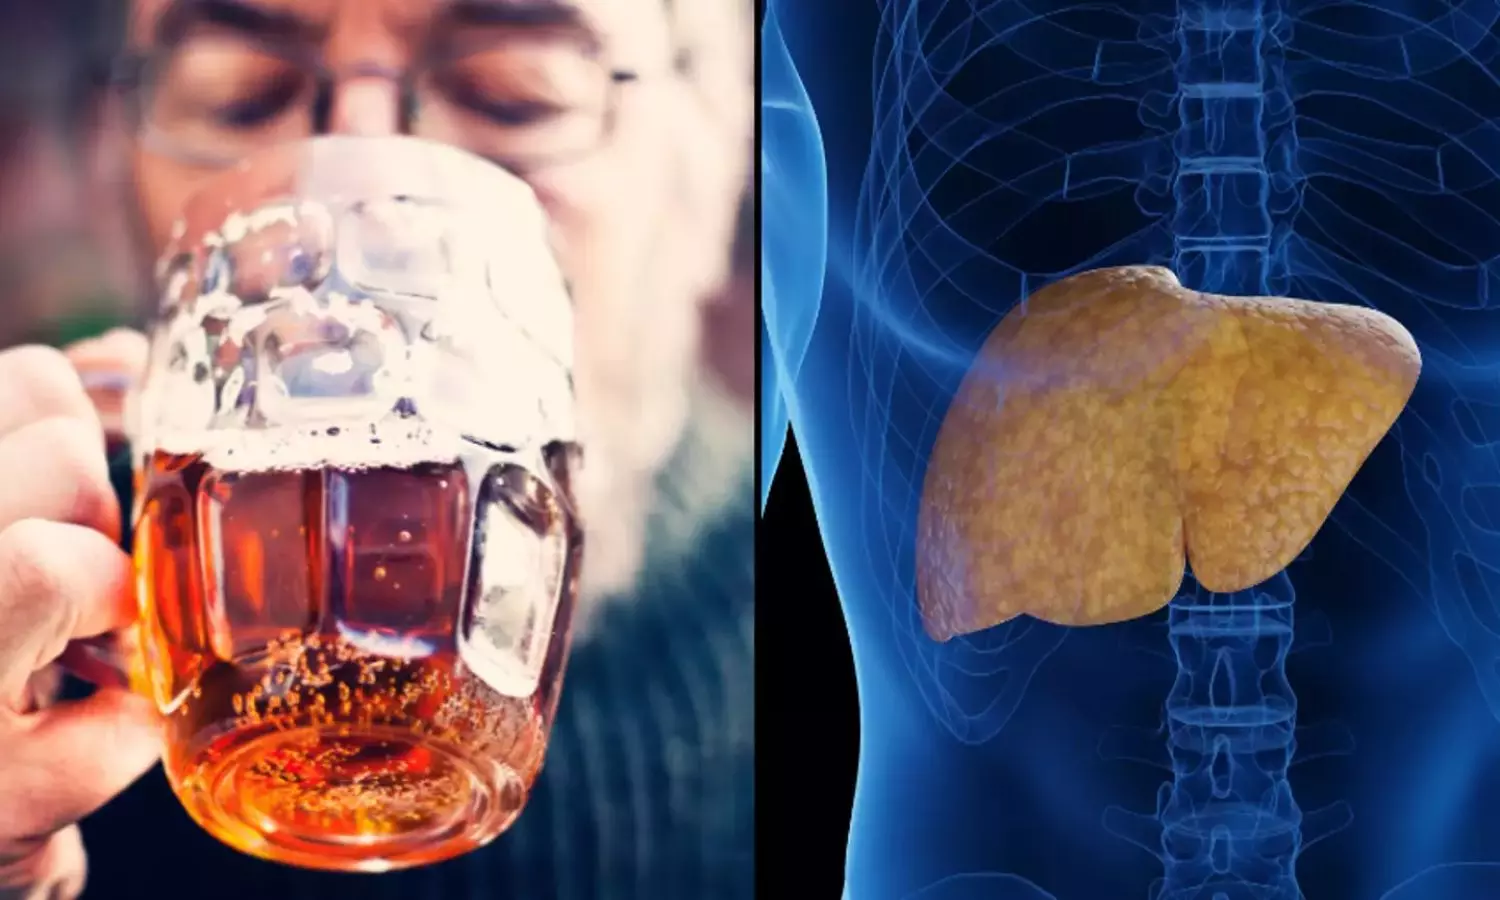 Are You Drinking Too Much Alcohol You Have To Take Nanogel To Protect Your Liver